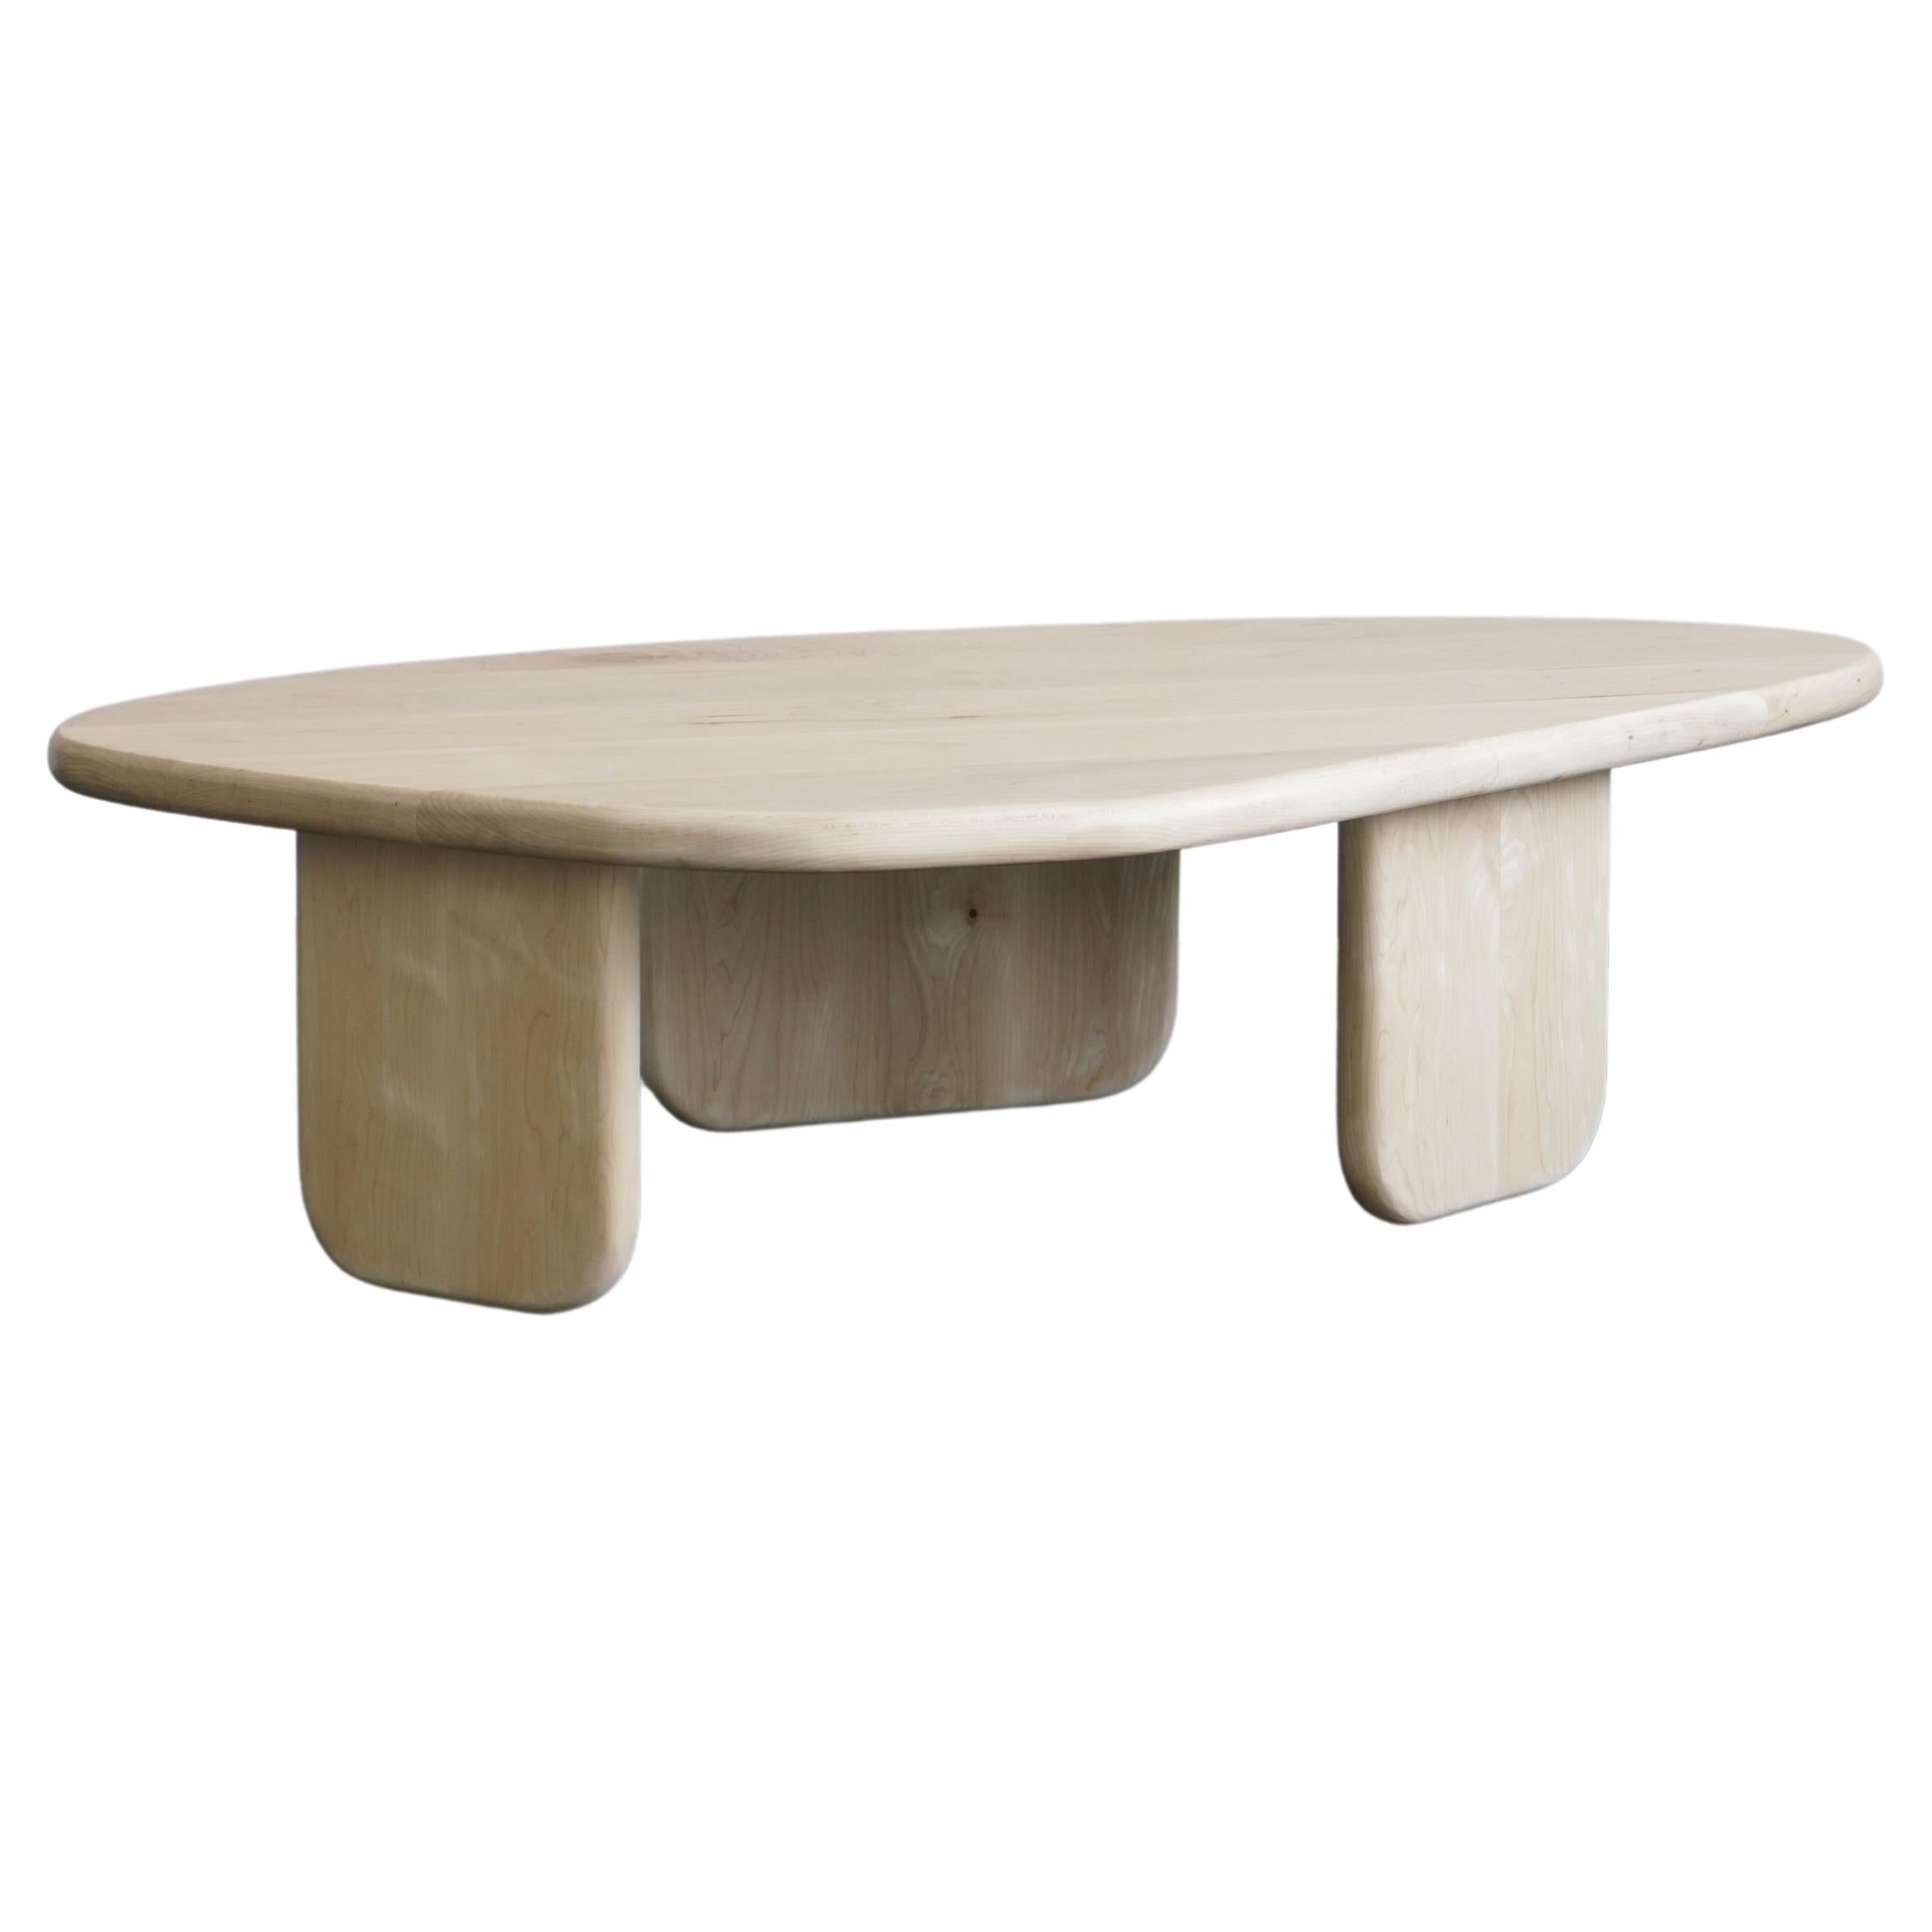 Maple Organic Shaped Coffee Table by Last Workshop, 2022